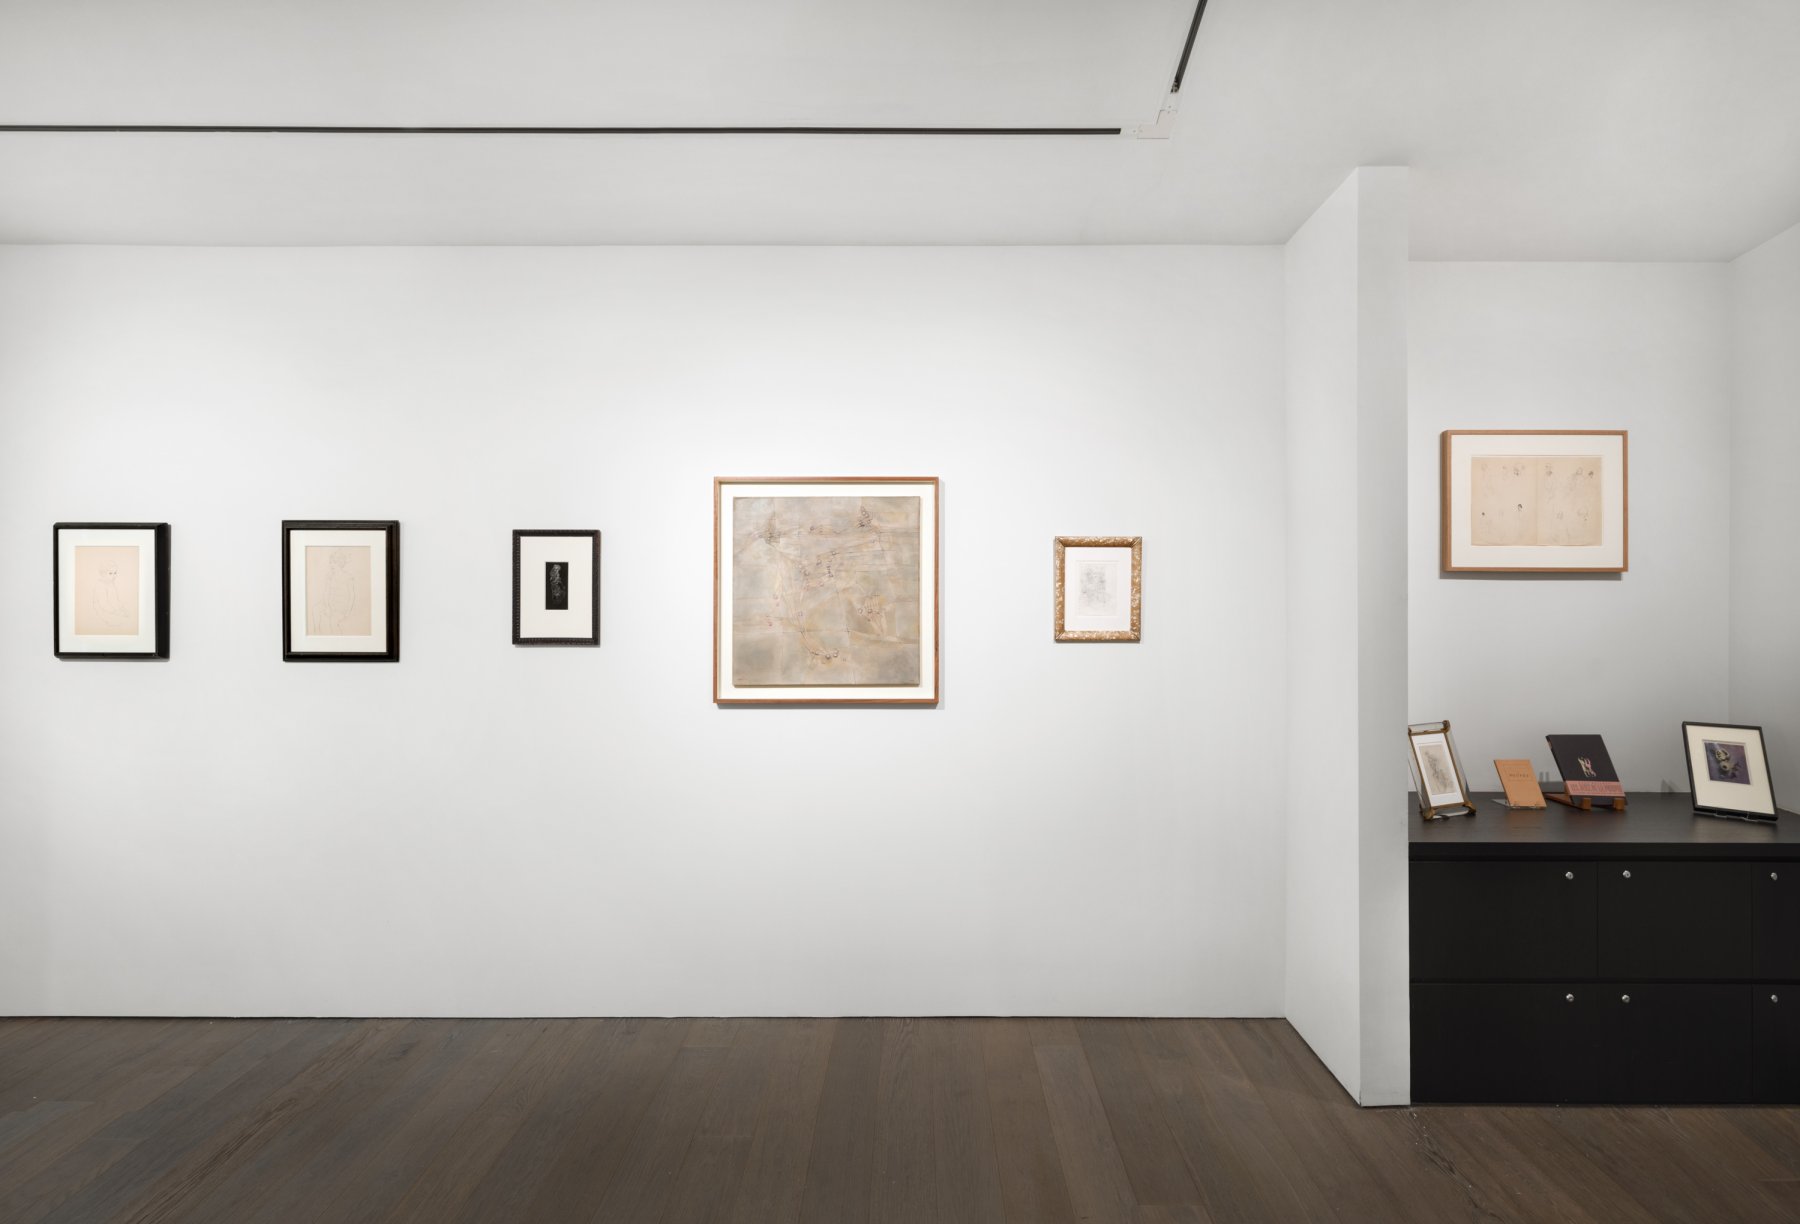 Installation image for Galerie 1900-2000: The Surreal World of Hans Bellmer, at Fleiss-Vallois